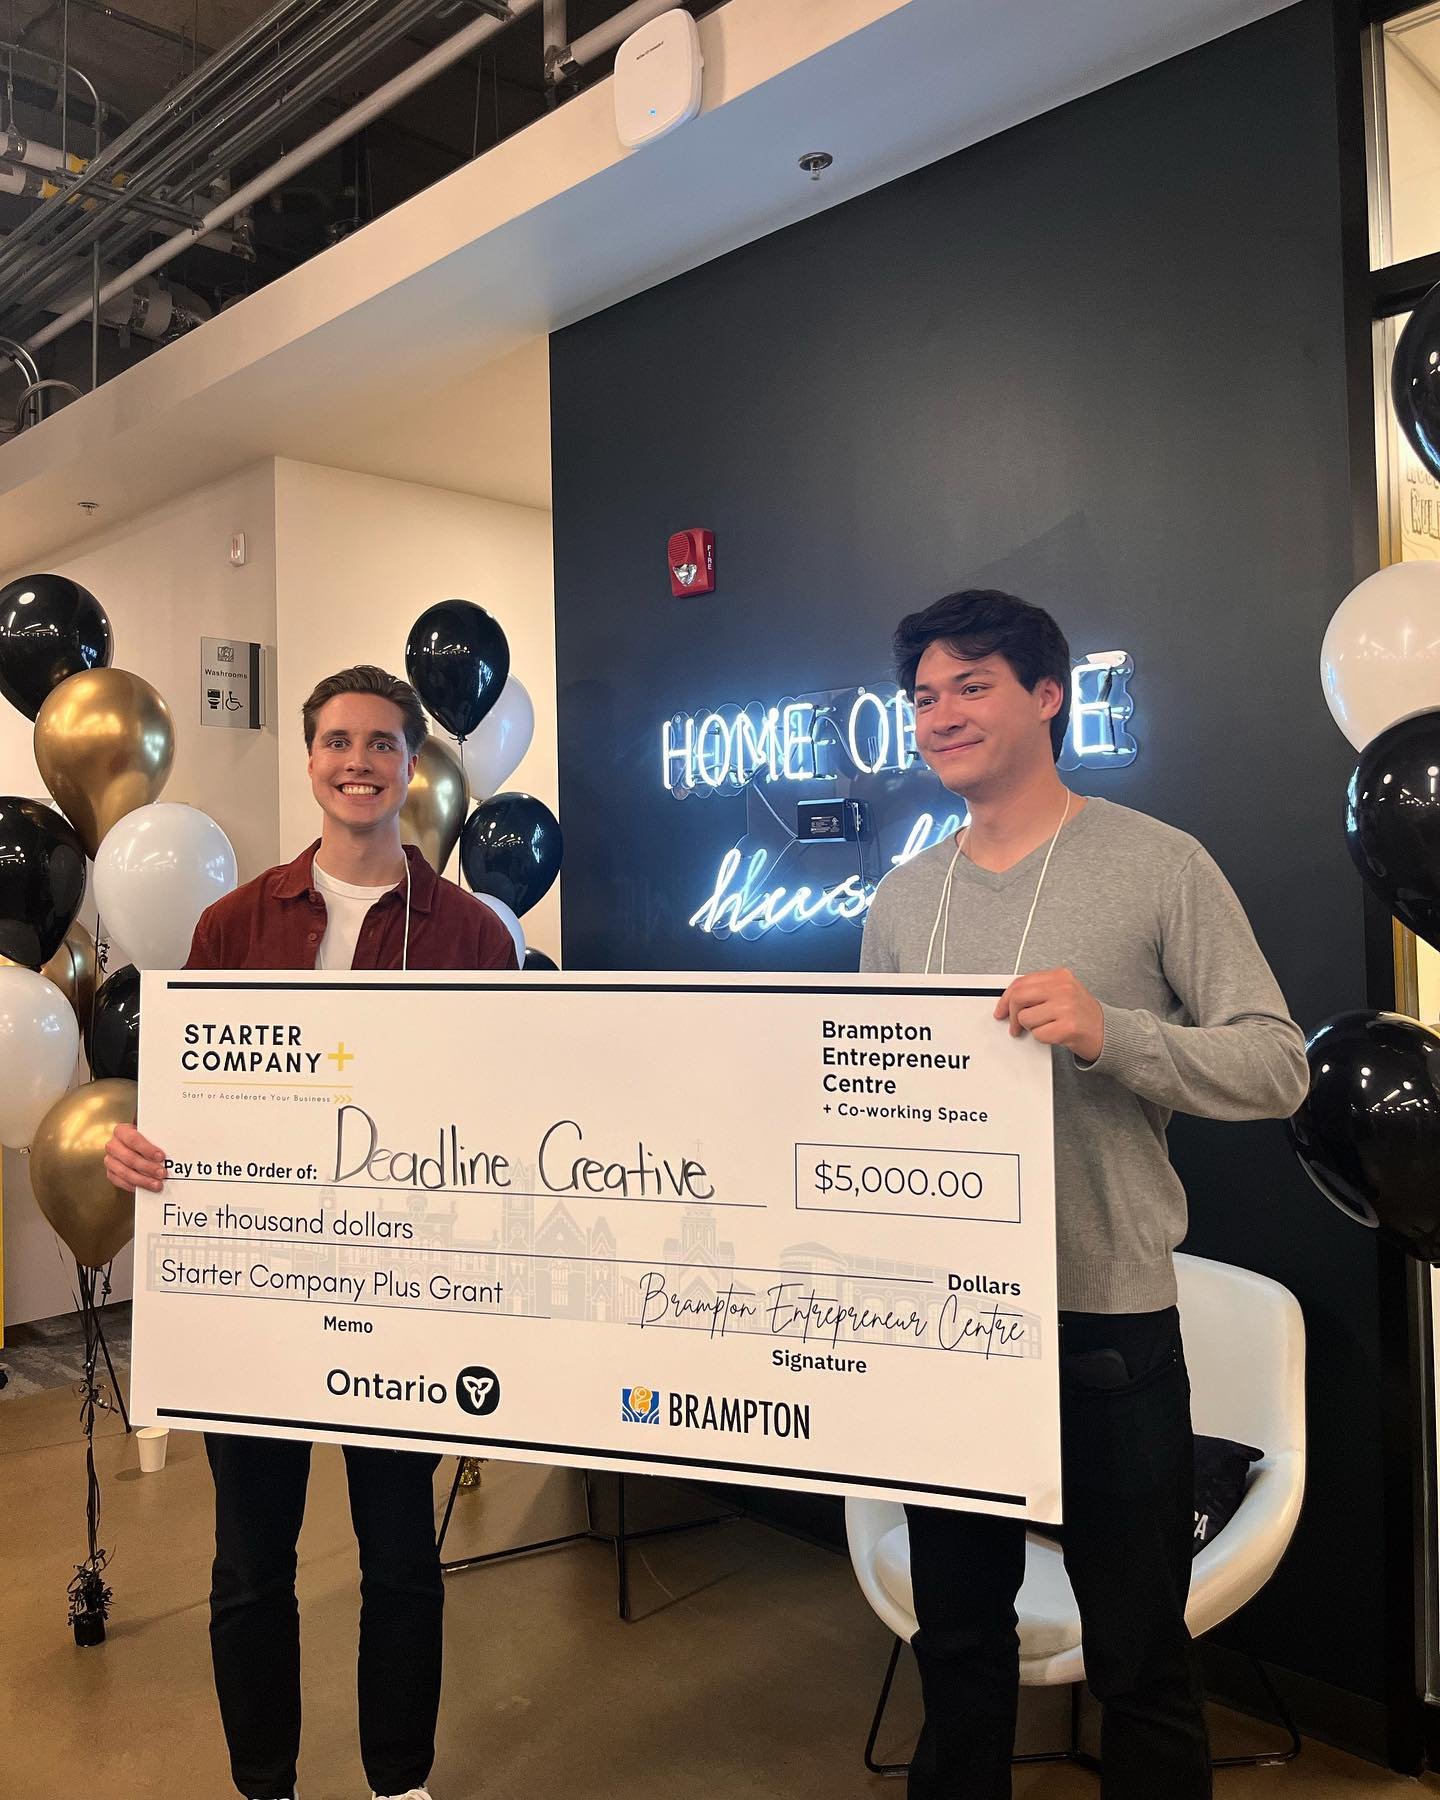 We did it!! 

We are so grateful to have gotten the starter company plus grant from the @bramptonbec!!

It&rsquo;s been great getting to meet everyone involved. 

Hard work pays off! 🚀